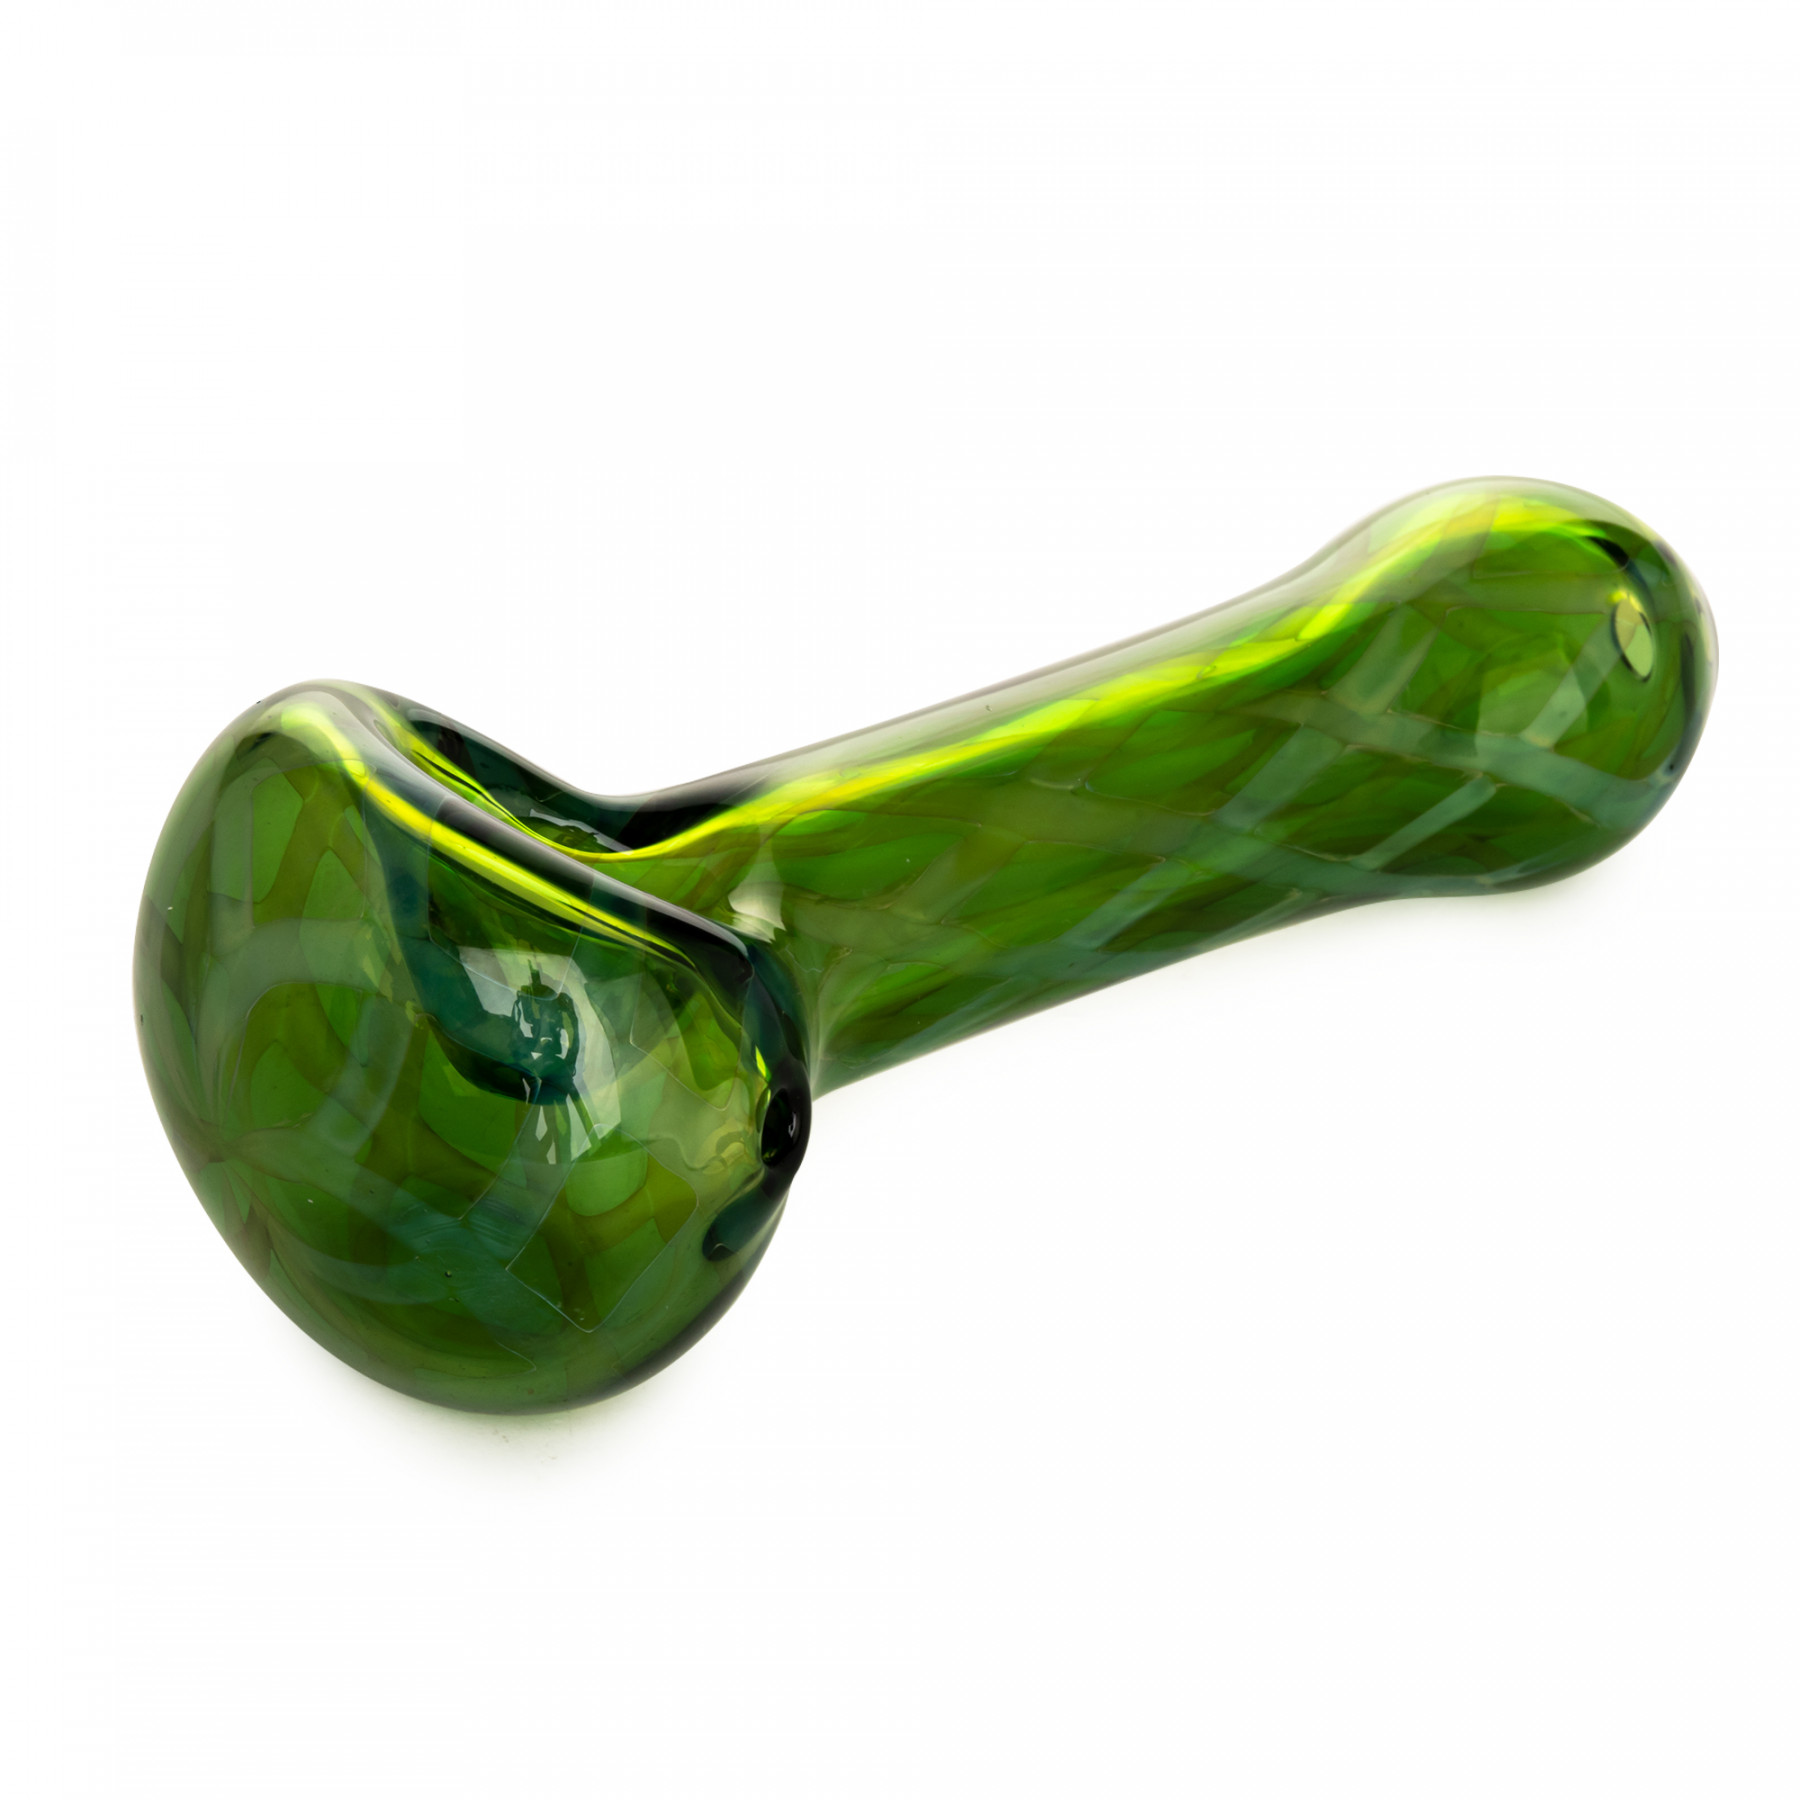 4.5" Crosshatch Spoon Hand Pipe